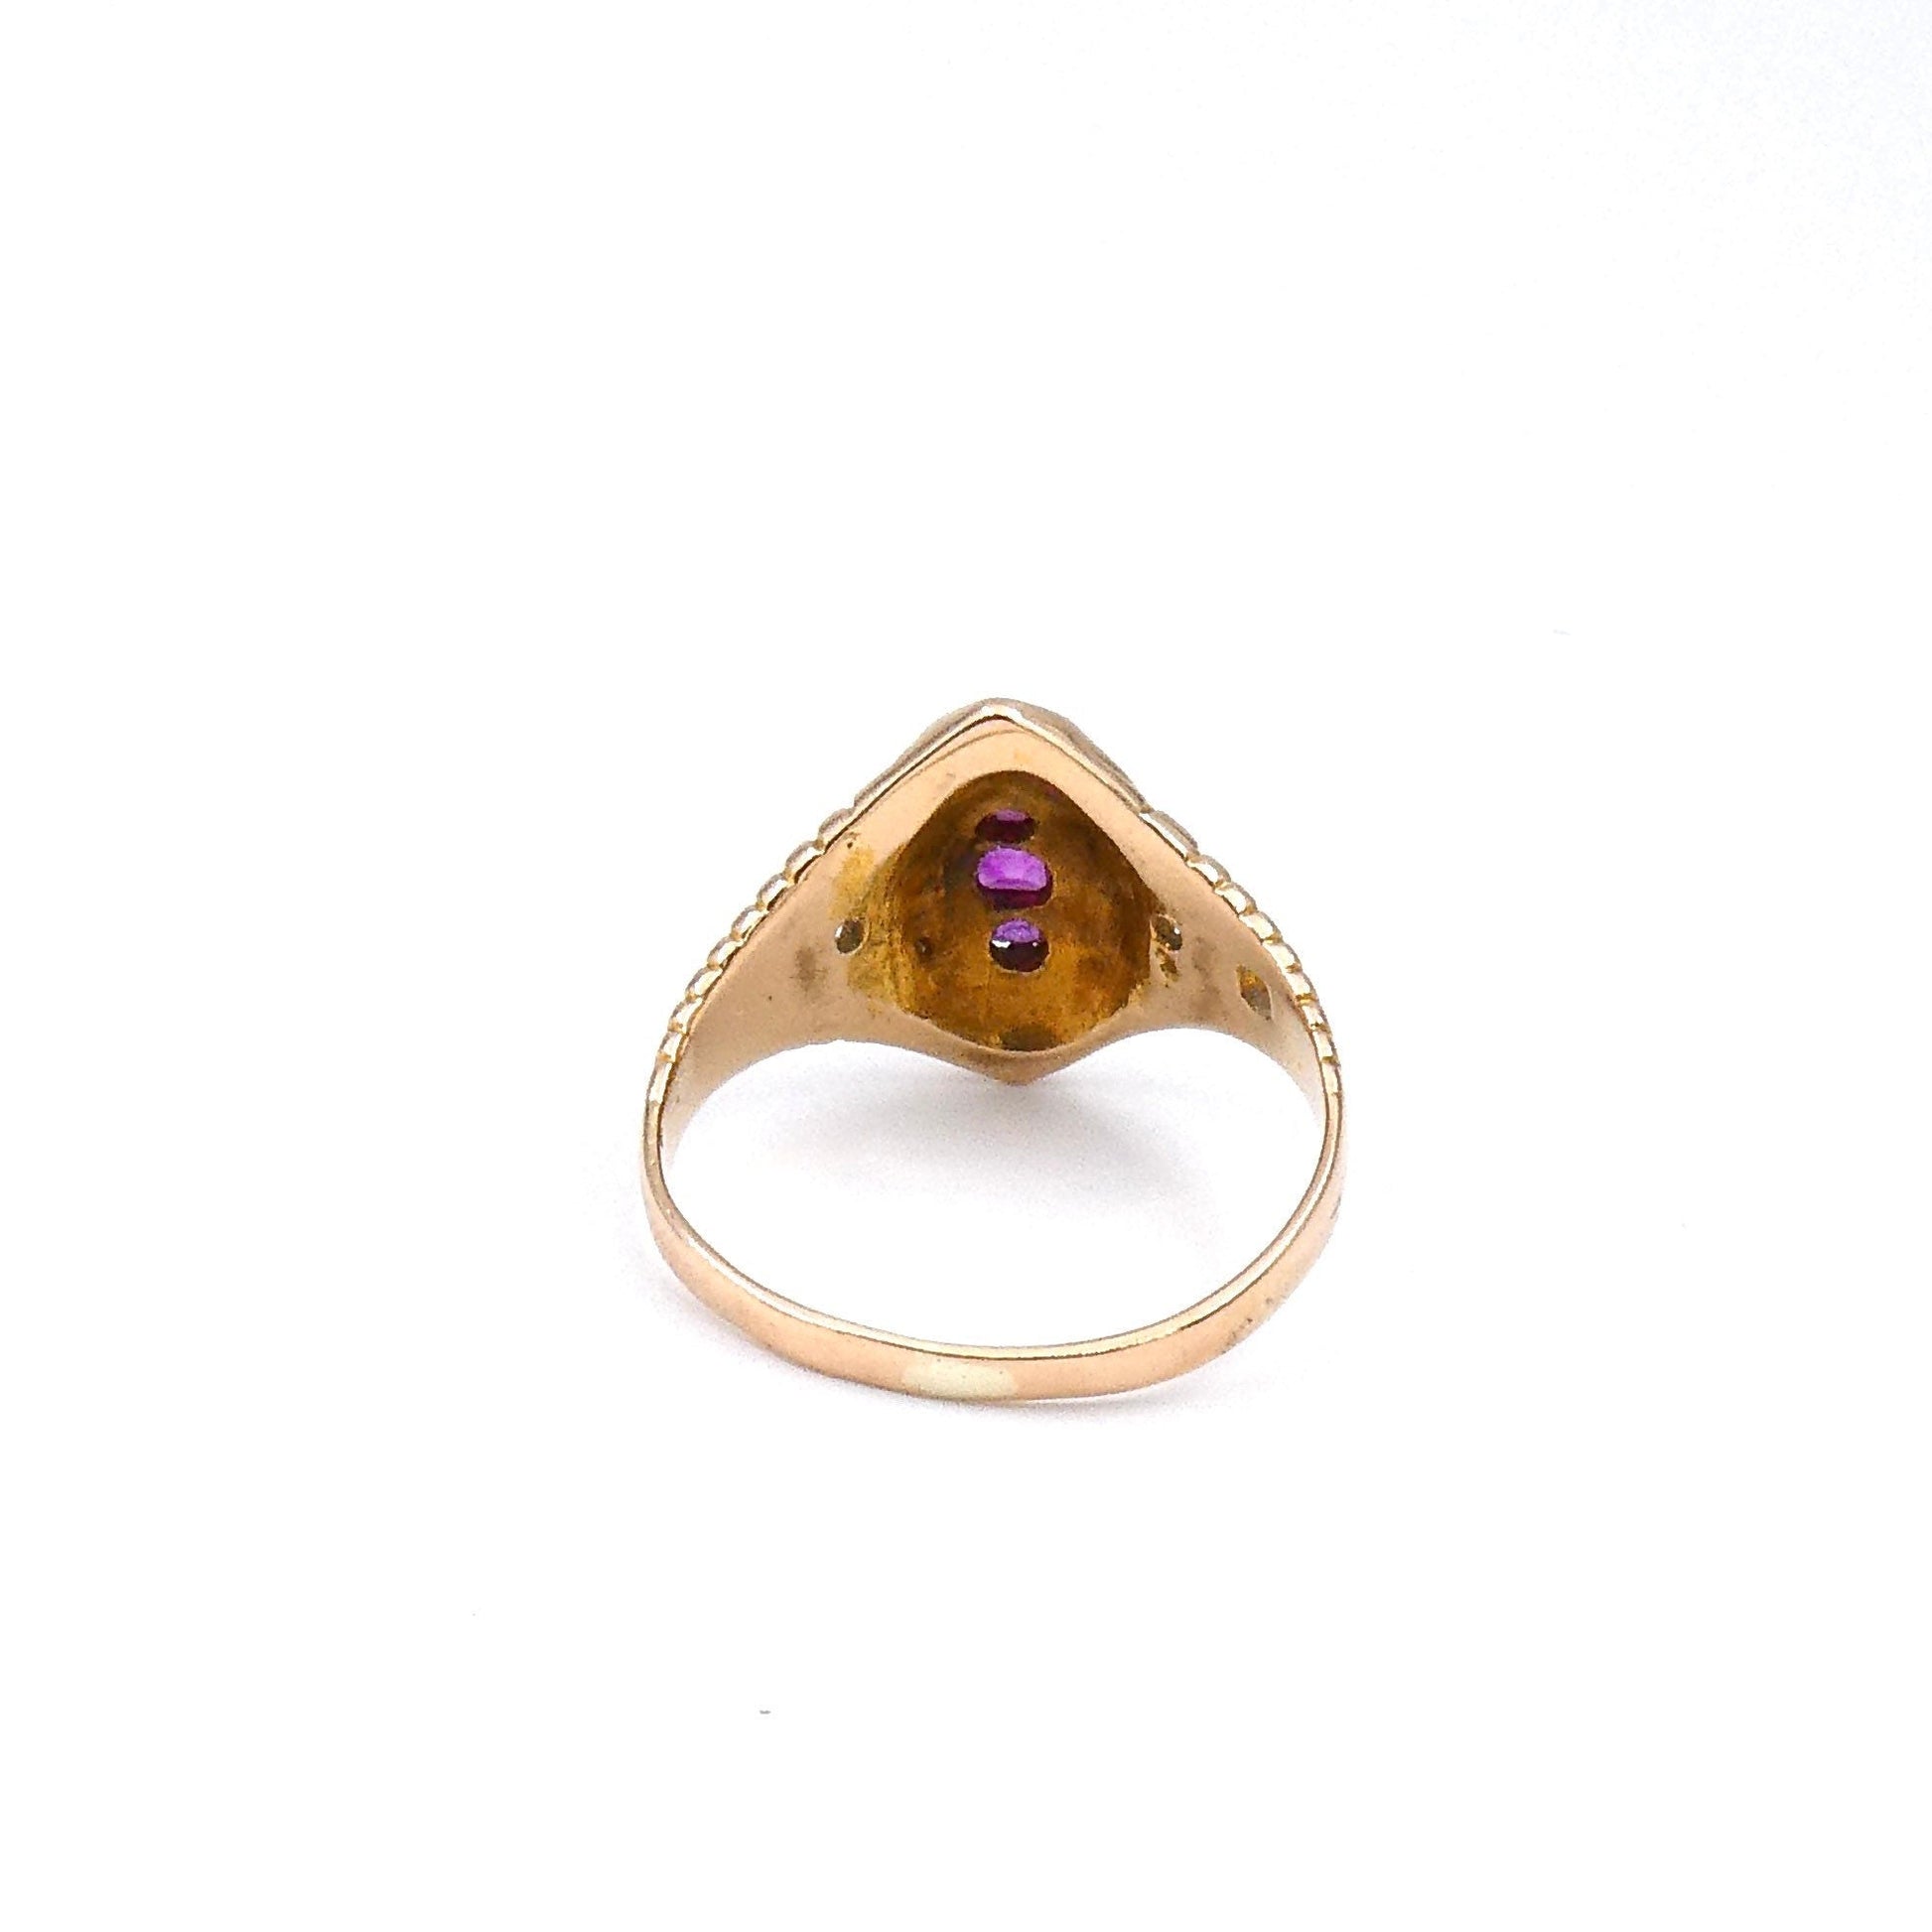 Antique ruby and pearl ring, a navette ring hallmarked 15kt gold - Collected